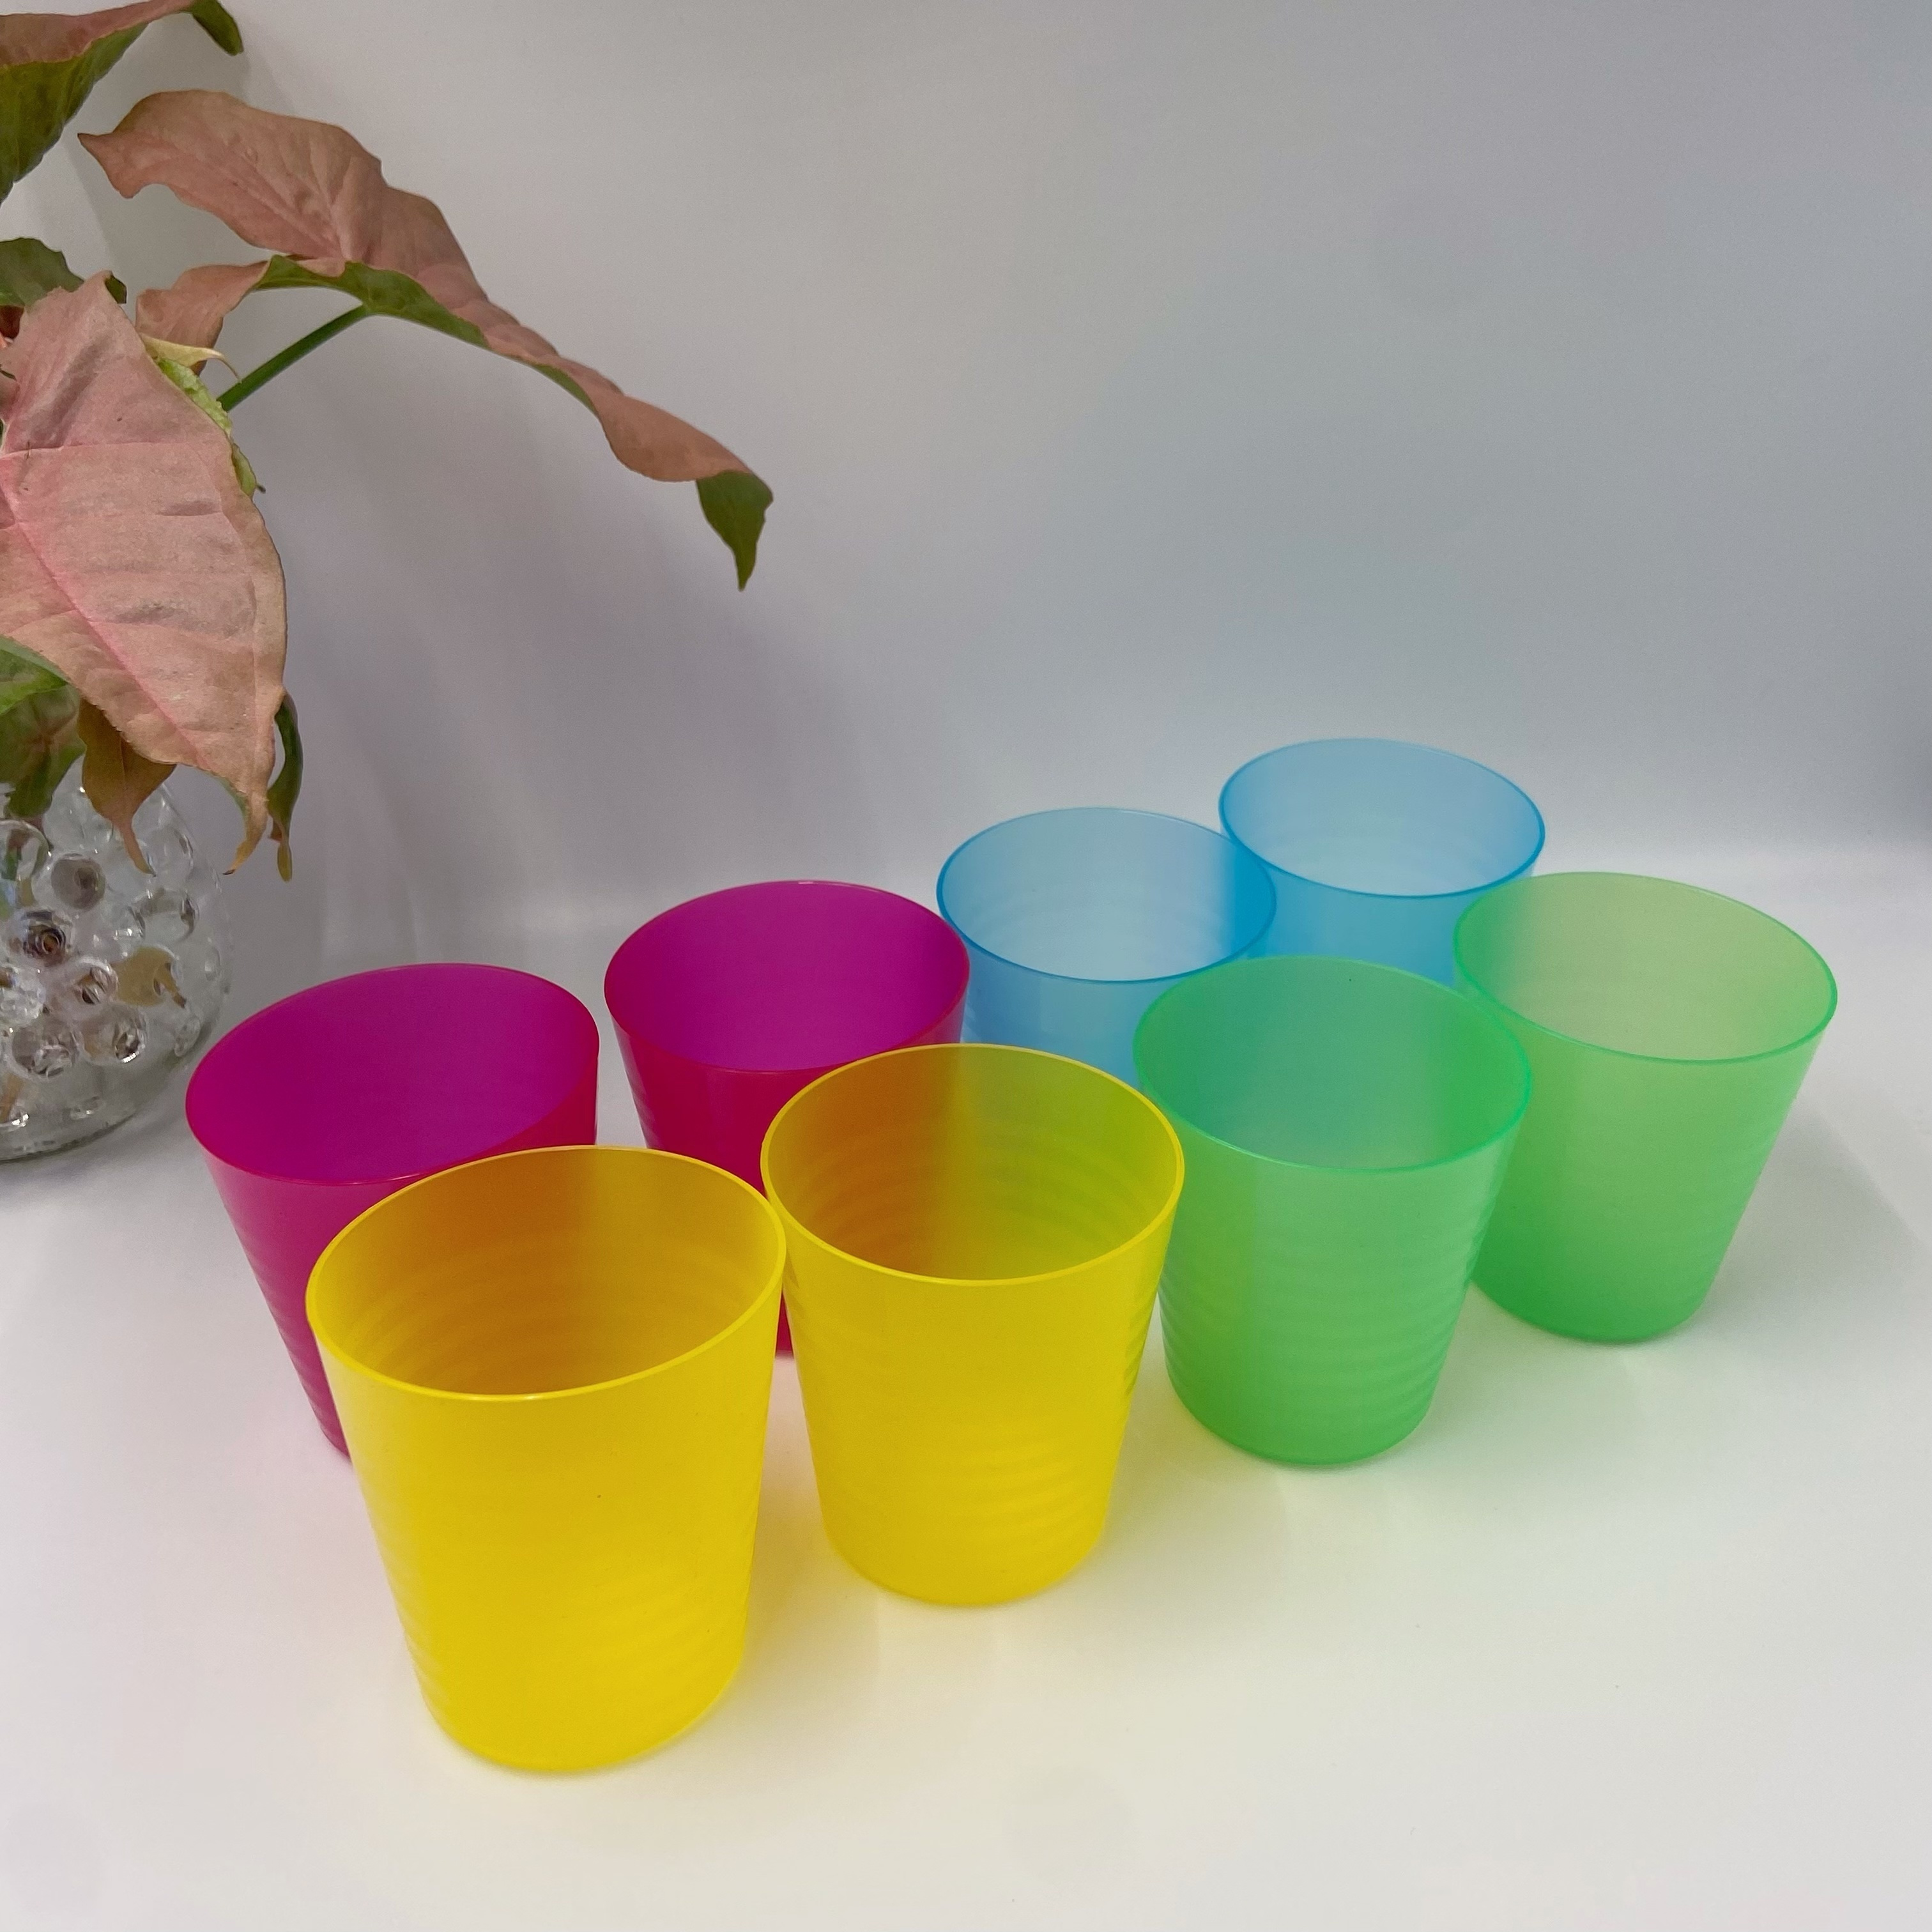 

8pcs, Plastic Tumblers Reusable Drinking Cup Unbreakable Beverage Glass Water Mugs Water Cups For Juice